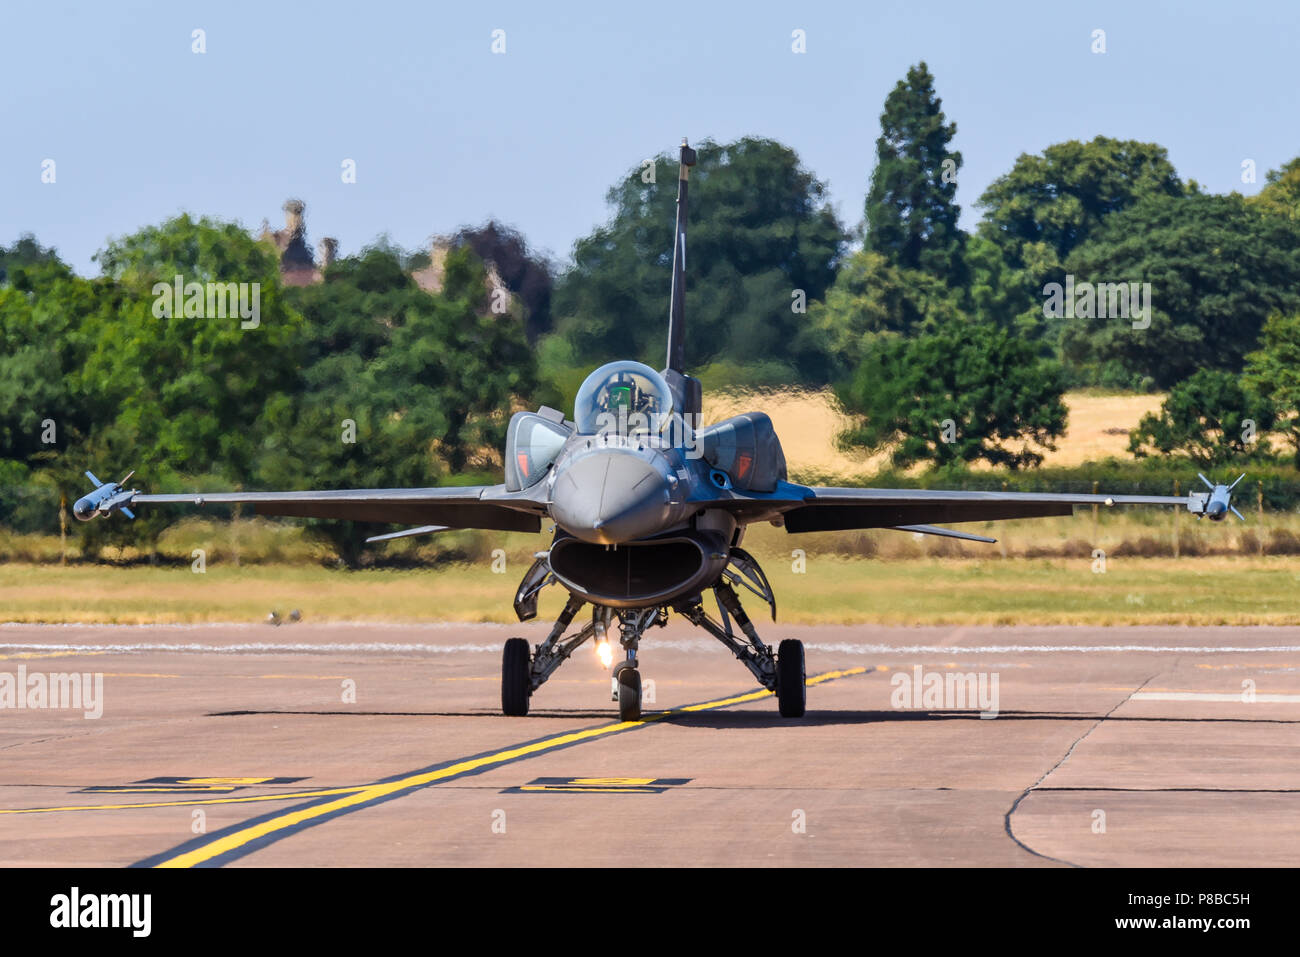 Greek F-16 Fighting Falcon at the Royal International Air Tattoo, RIAT 2018, RAF Fairford, Gloucestershire, UK.  Hellenic Air Force F-16C block 52 Stock Photo